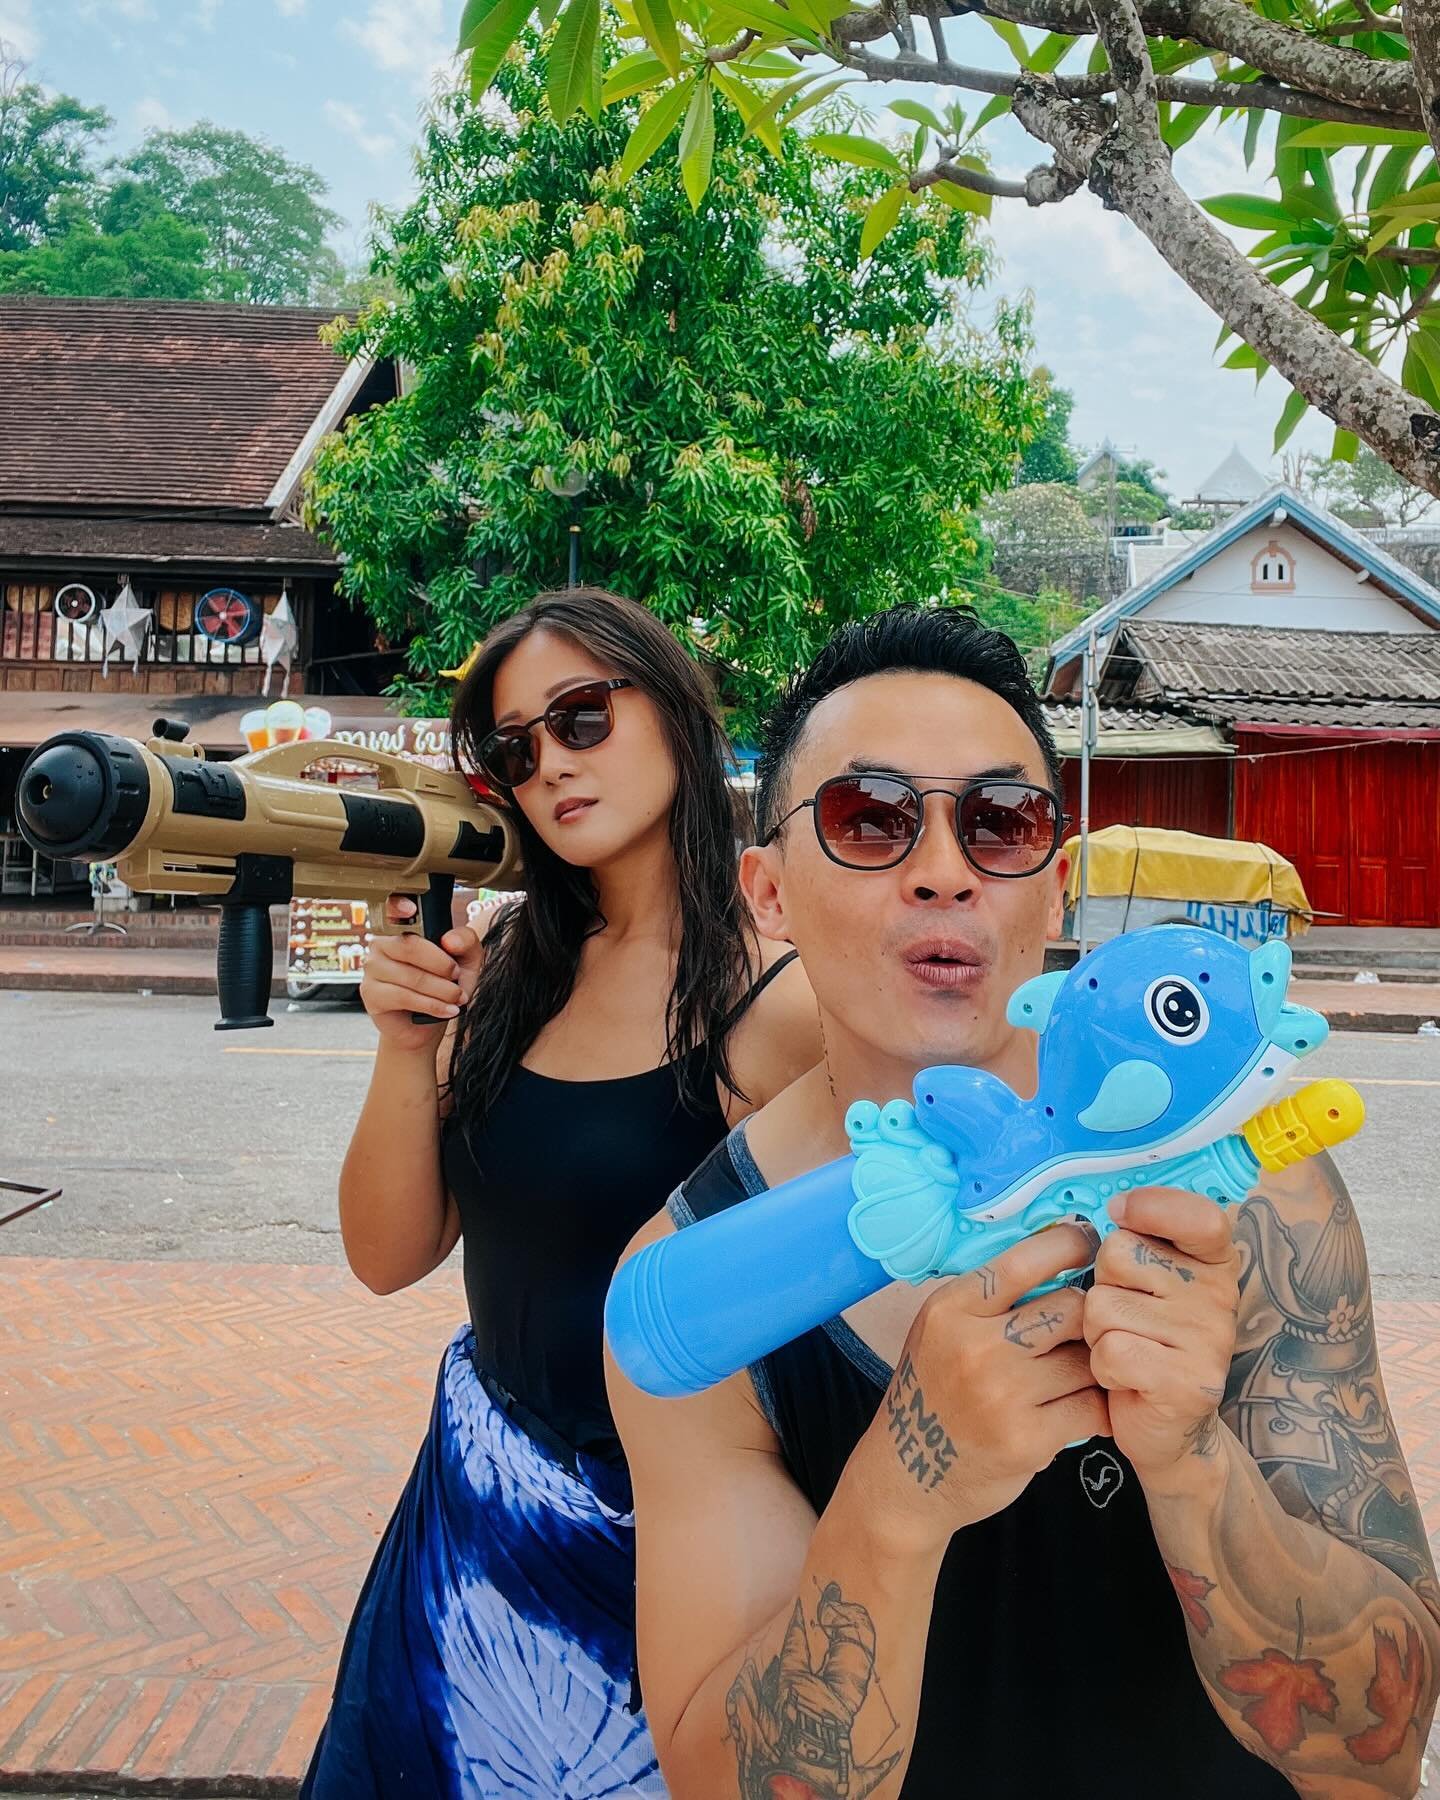 &ldquo;Sabai Dee Pee Mai Lao&rdquo; Everyone!!! 💦💦💦

We haven&rsquo;t celebrated Songkran in years but this year we get to experience what it&rsquo;s like in Luang Prabang 🇱🇦

It&rsquo;s not as crazy as Thailand but you can really feel the joy a